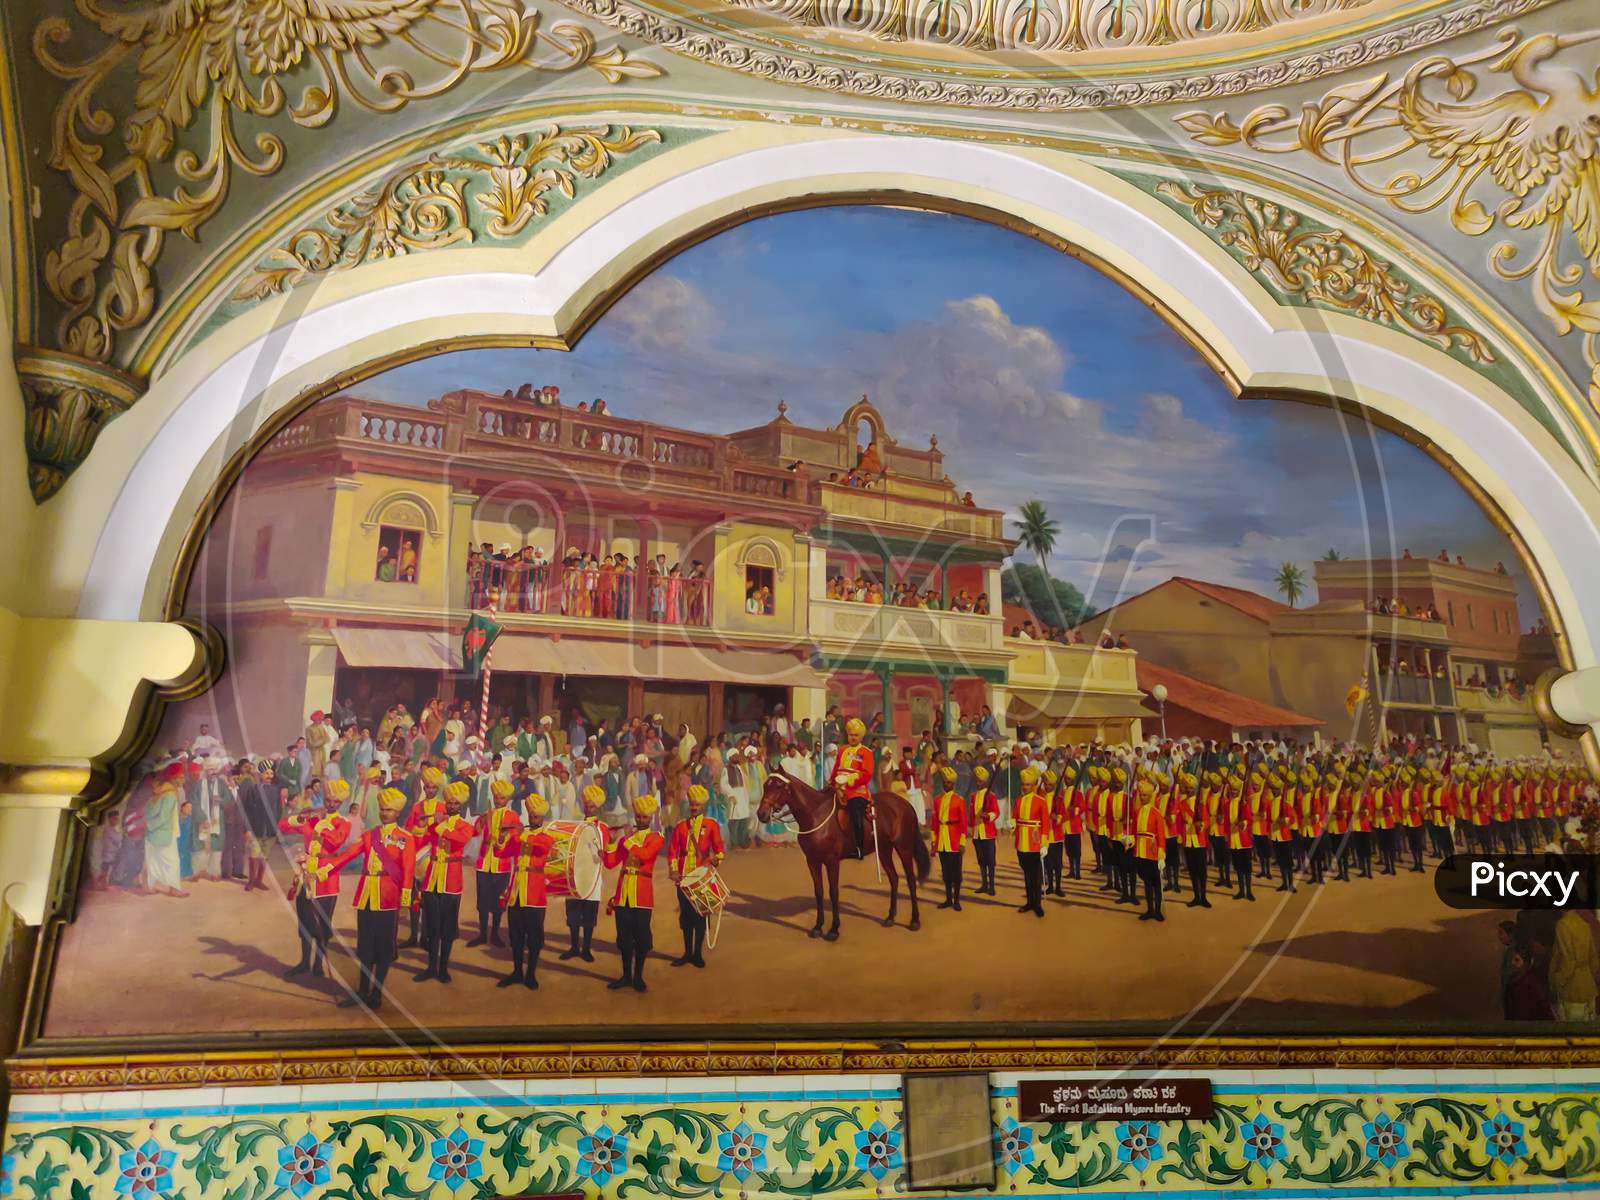 September 8, 2019- Mysore, India: A Painting Of Soldiers On The Walls Of Mysore Royal Palace In Mysore, India